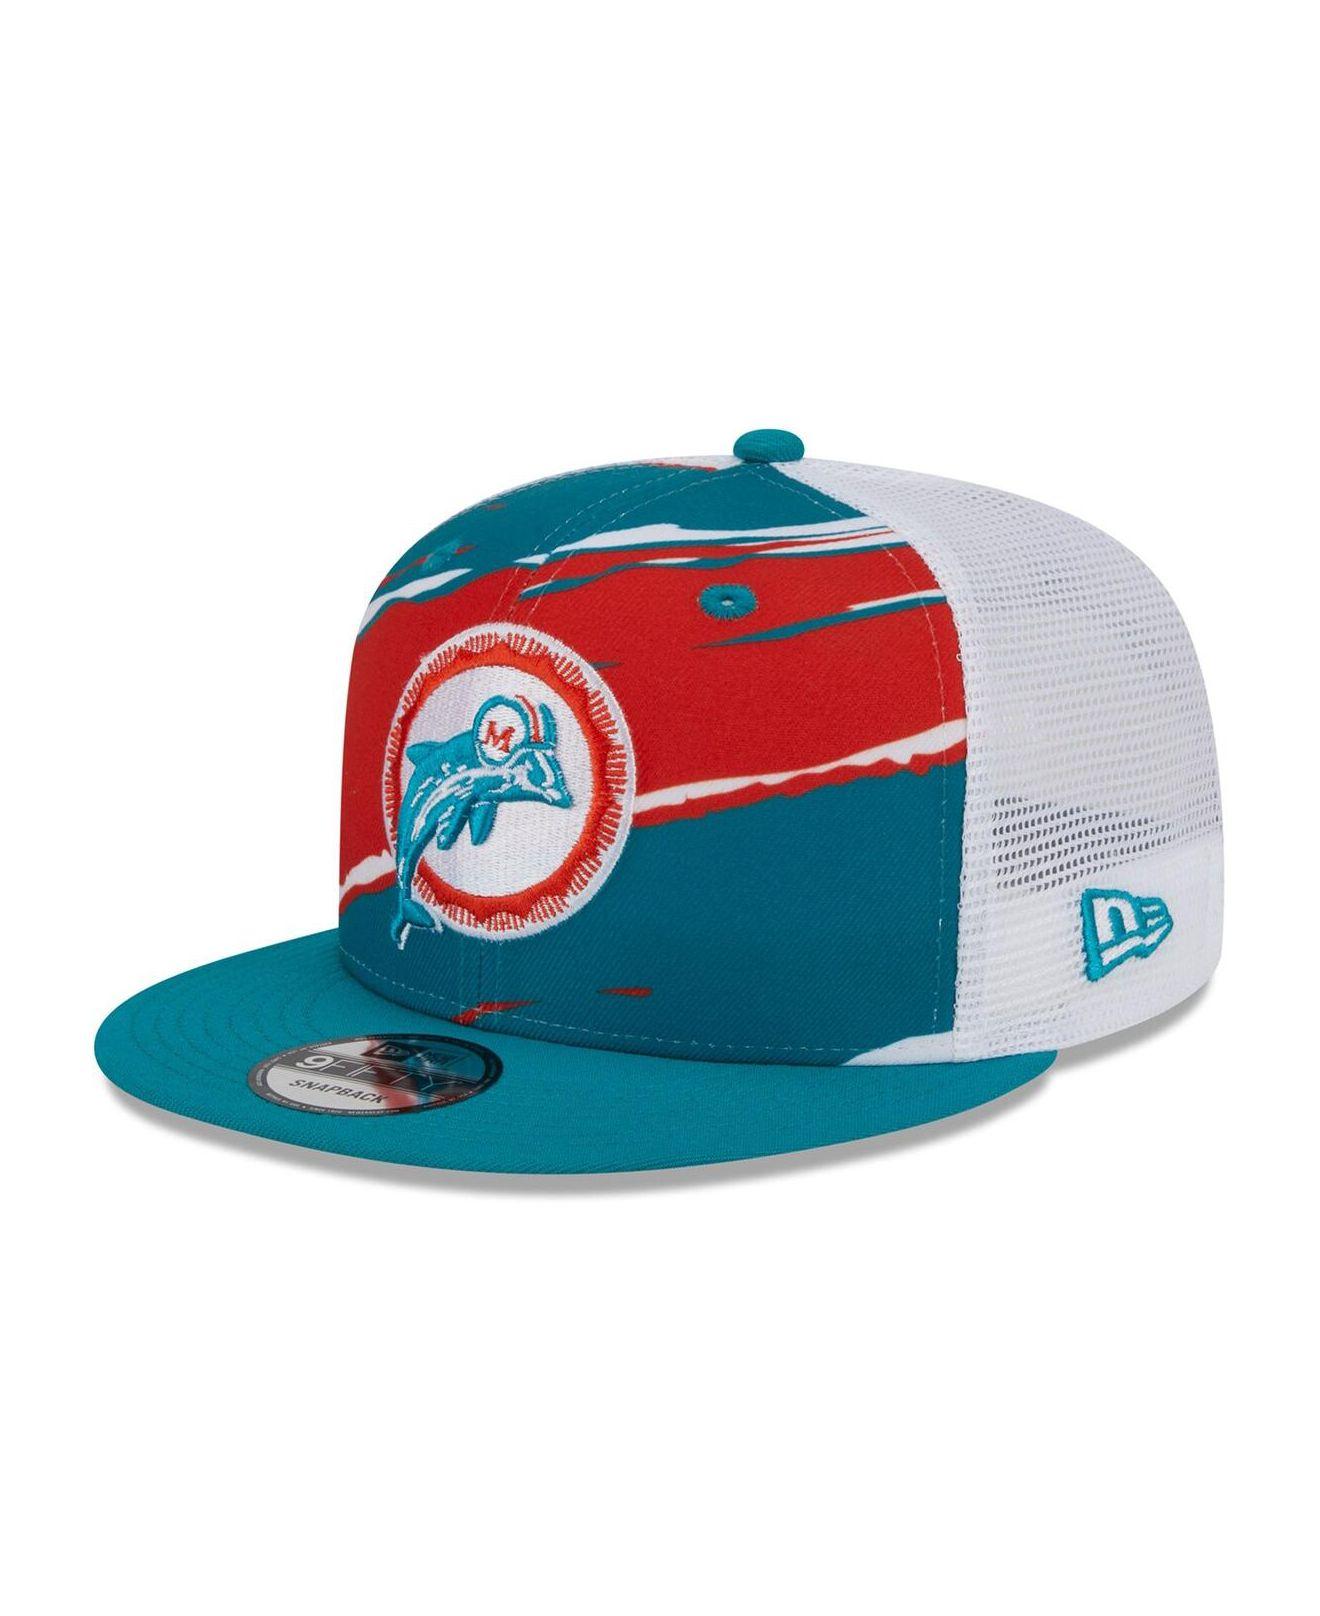 Men's Miami Dolphins New Era Red Color Pack Brights 9FIFTY Snapback Hat